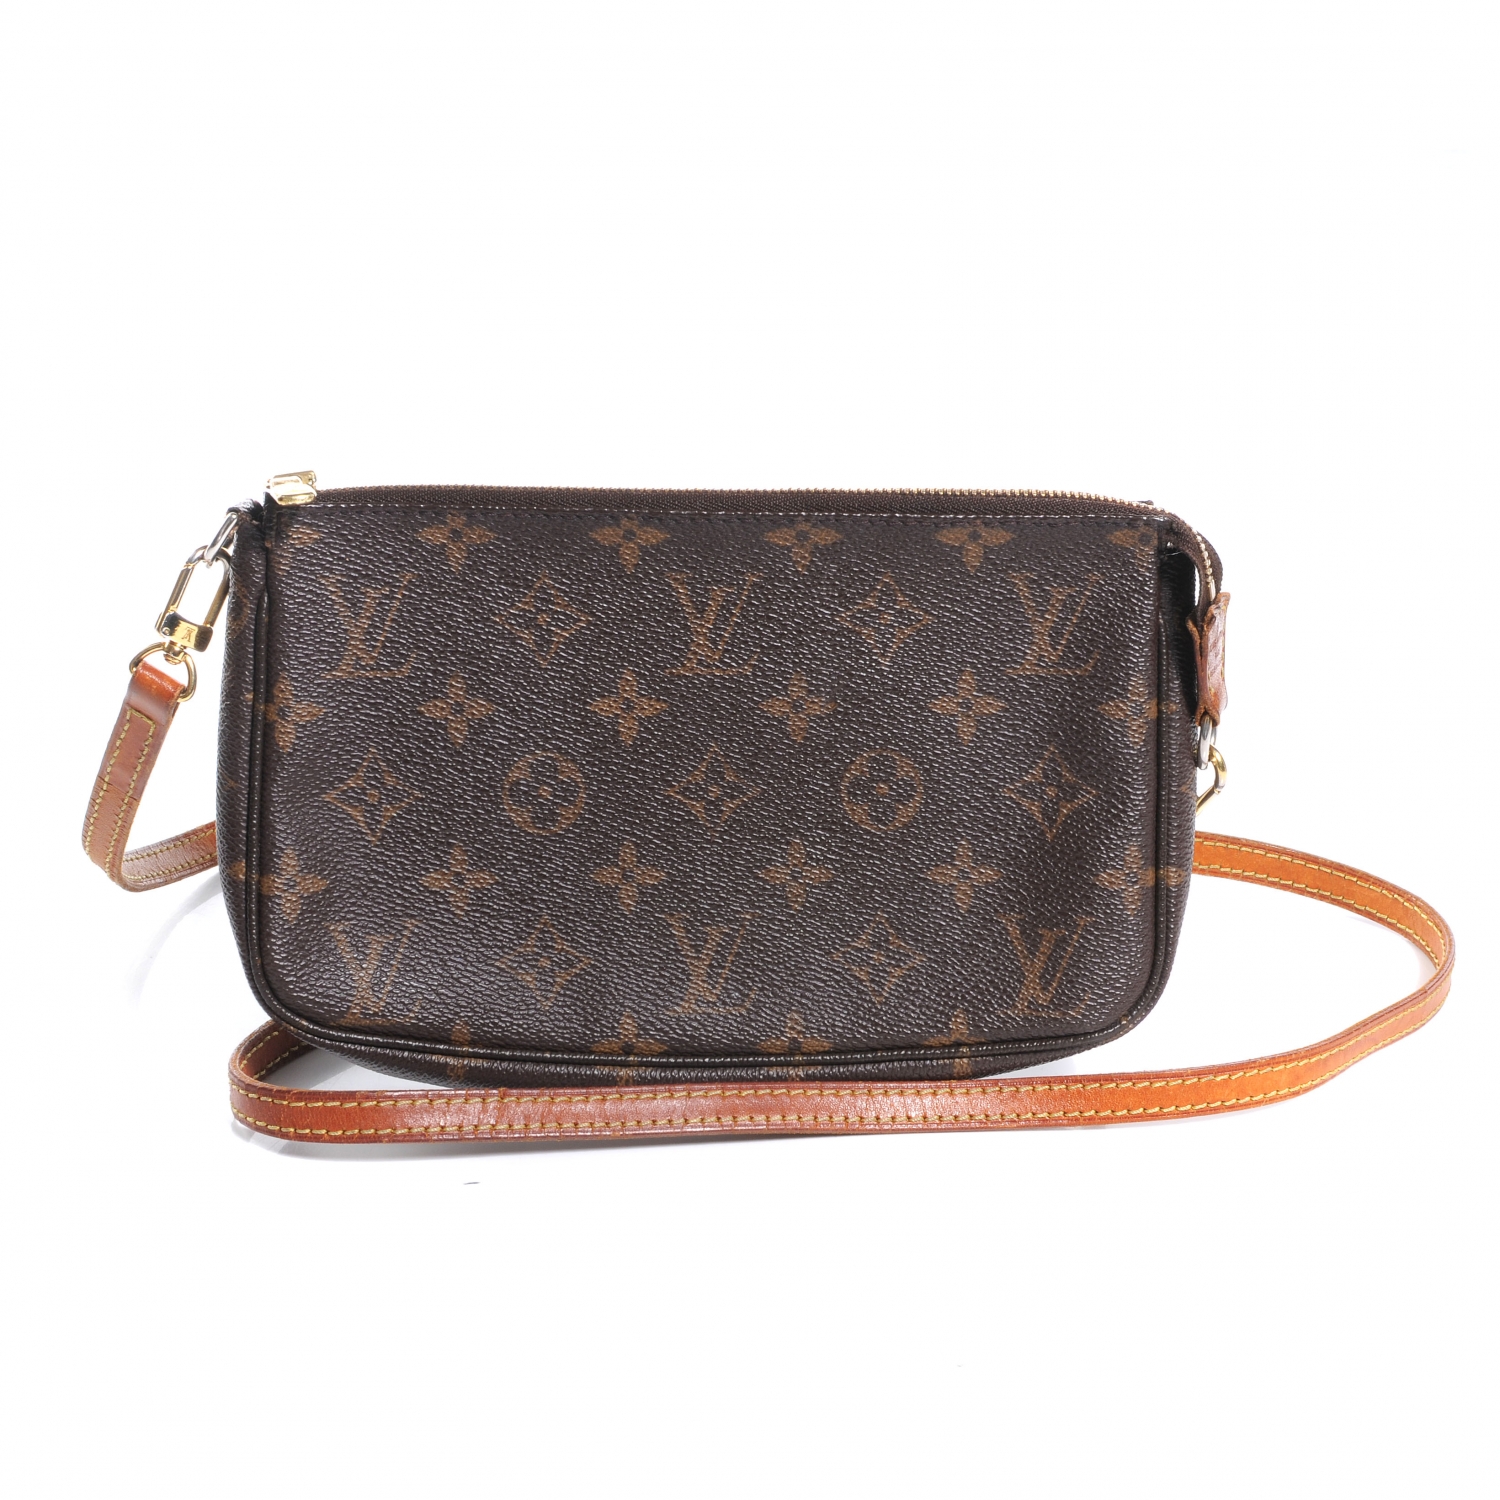 Louis Vuitton Pochette Accessoires NM Review, Chain&Cross Body, What fits  in? 